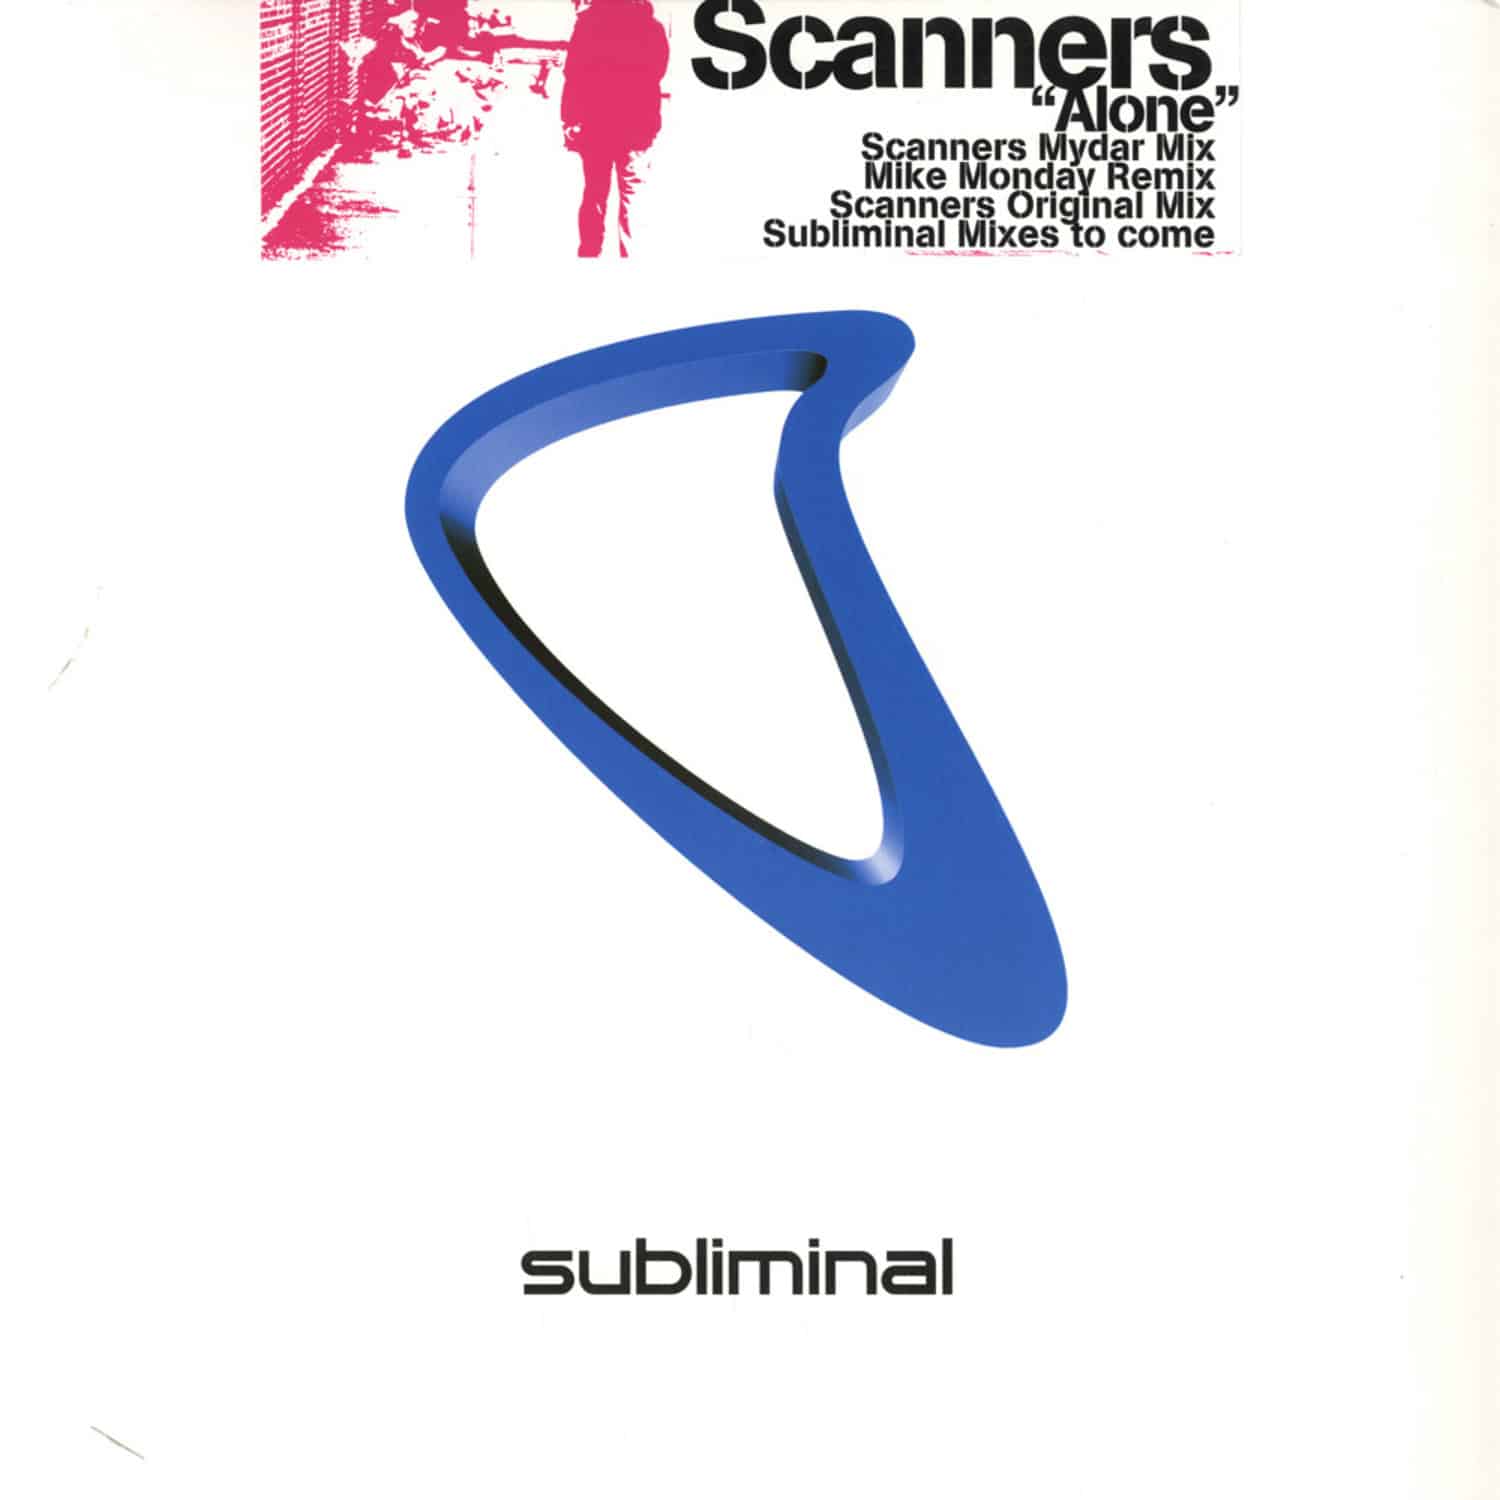 Scanners - ALONE